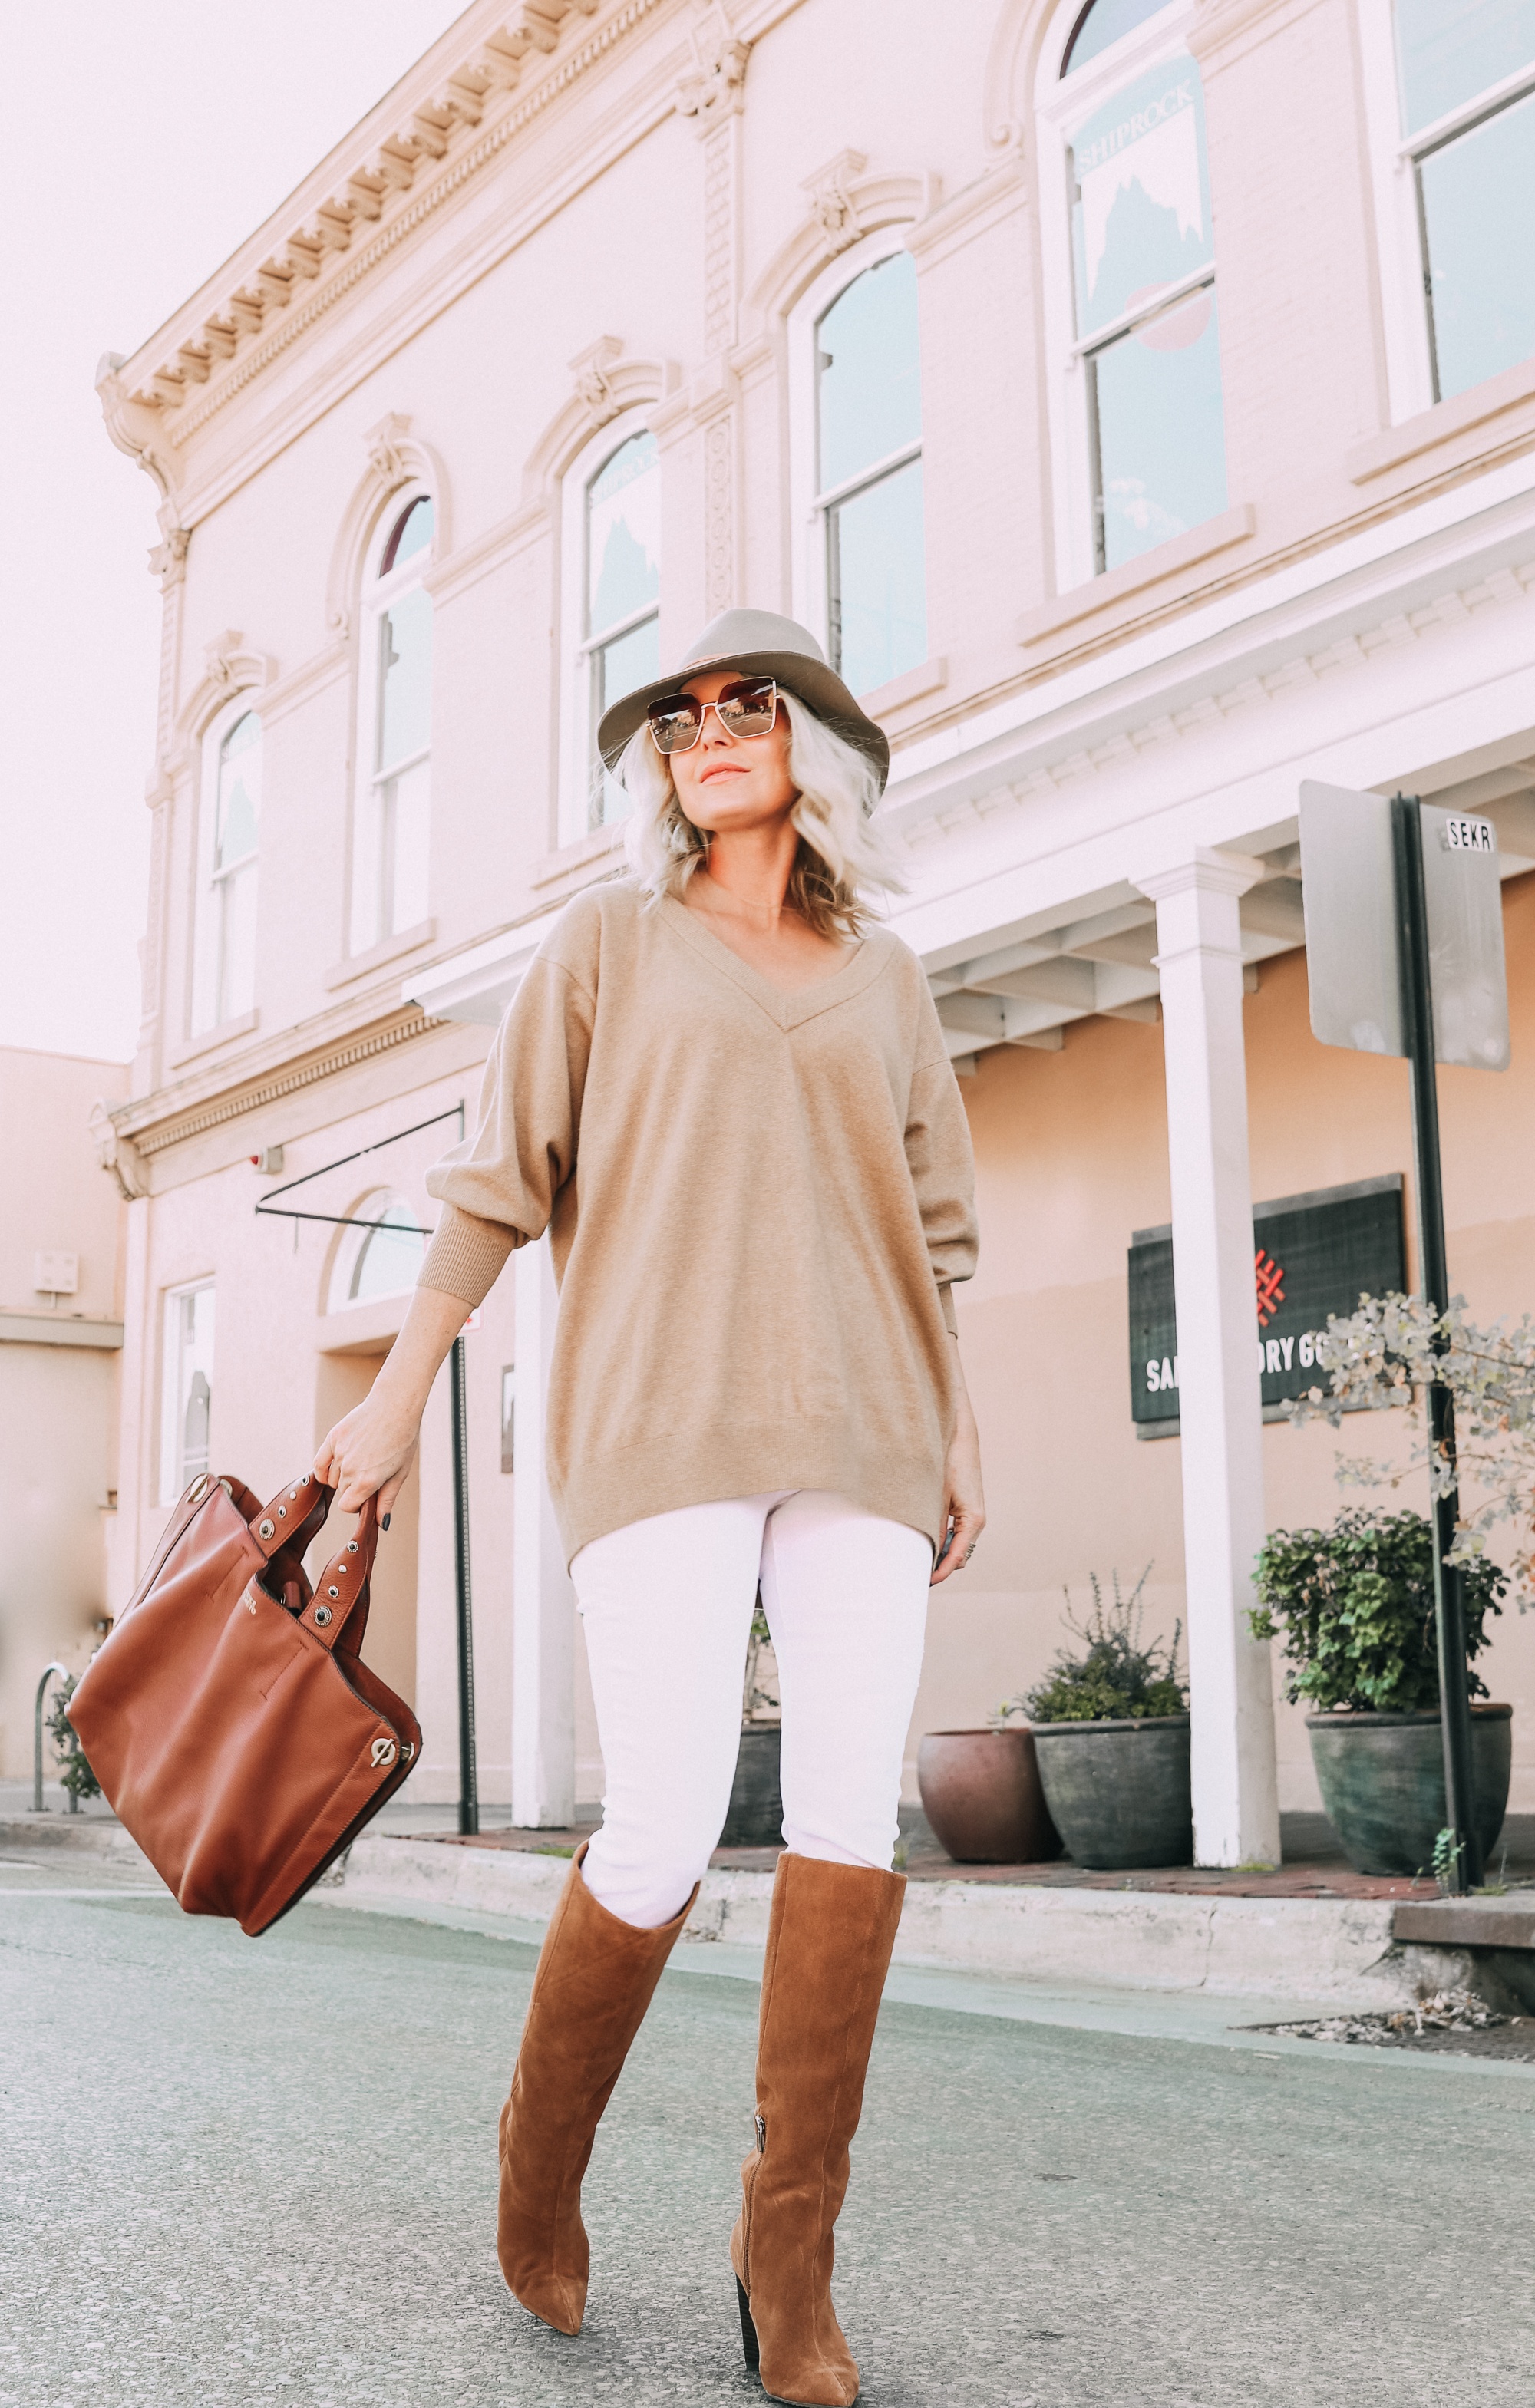 Brown Accessories For Fall, Fashion blogger Erin Busbee of BusbeeStyle.com wearing brown boots and brown tote from Vince Camuto with white jeans, camel sweater, leopard scarf, and Rag & bone hat in Santa Fe, New Mexico